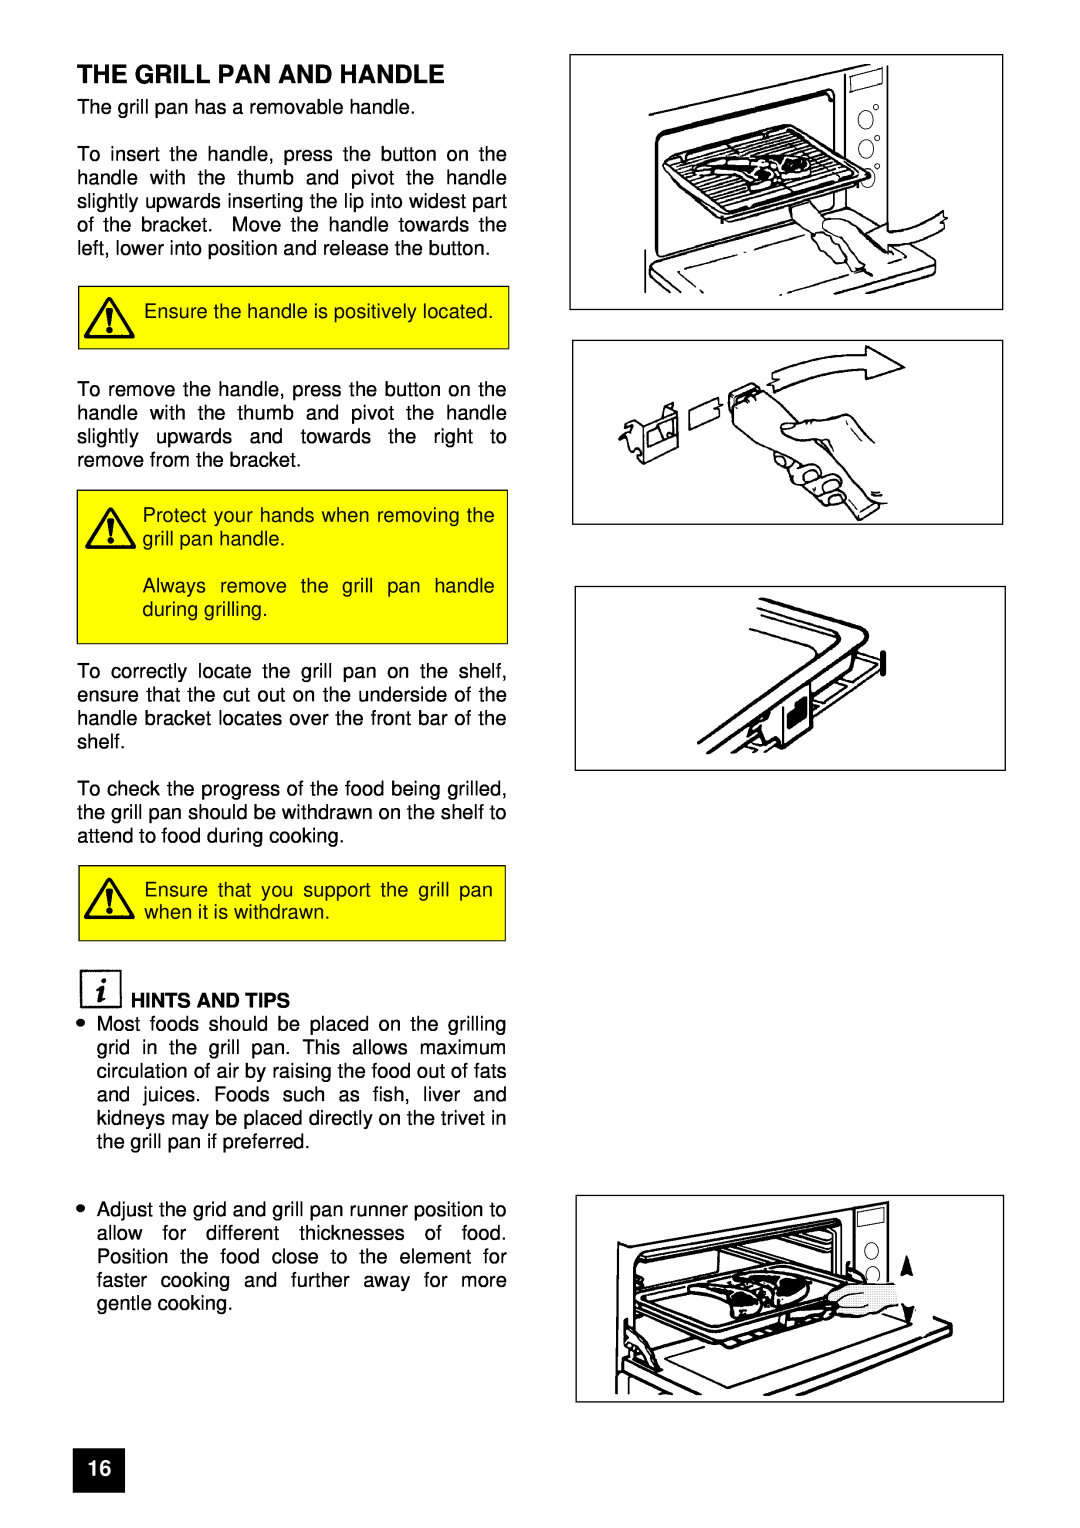 Tricity Bendix E 750 installation instructions The Grill Pan And Handle, Hints And Tips 